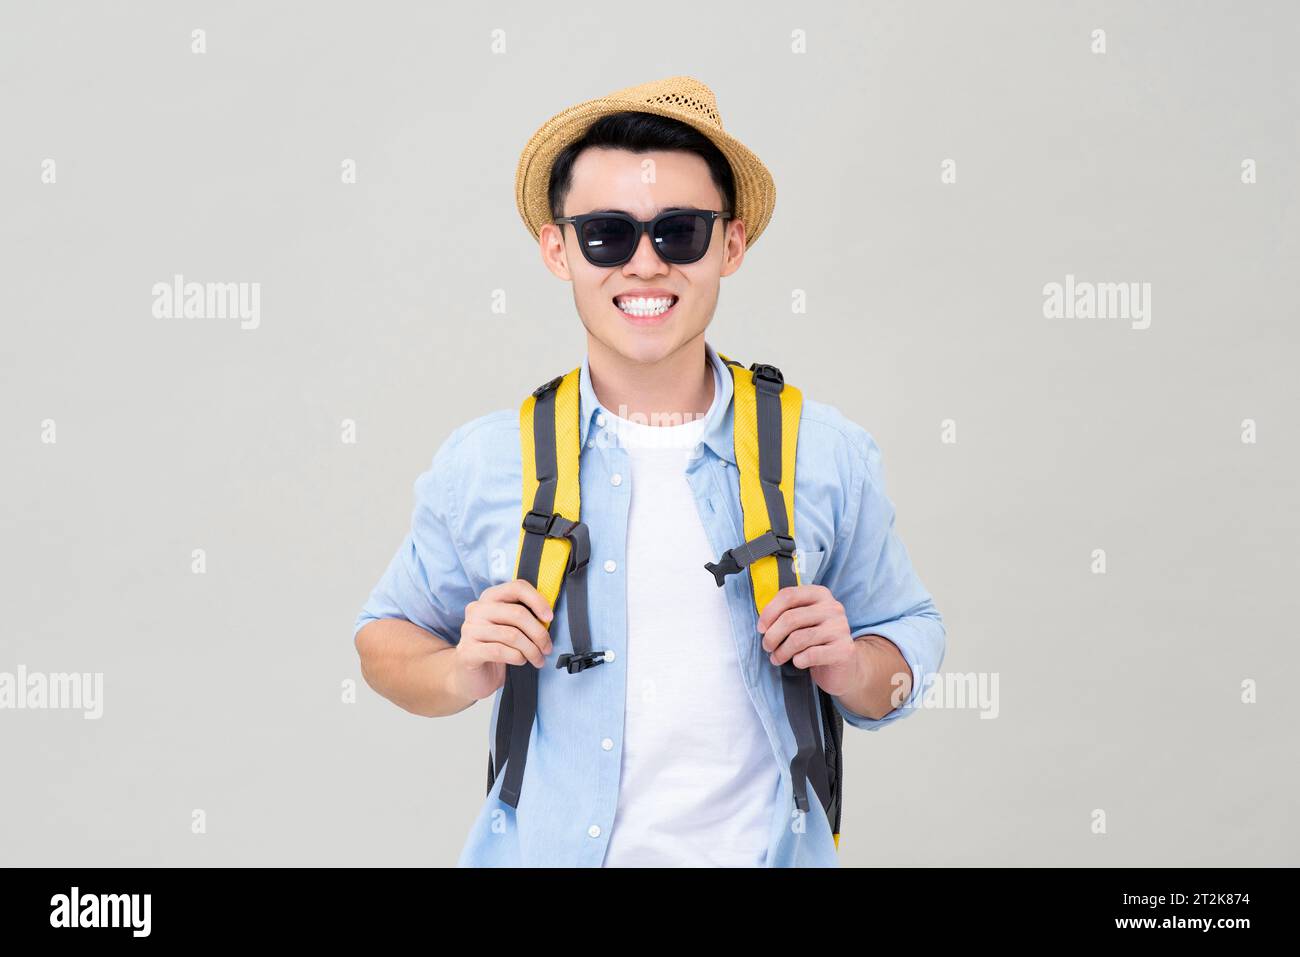 Porttrait of young smiling Asian tourist man with backpack wearing hat and sunglasses read for summer vacations, studio shot isolated in gray backgrou Stock Photo